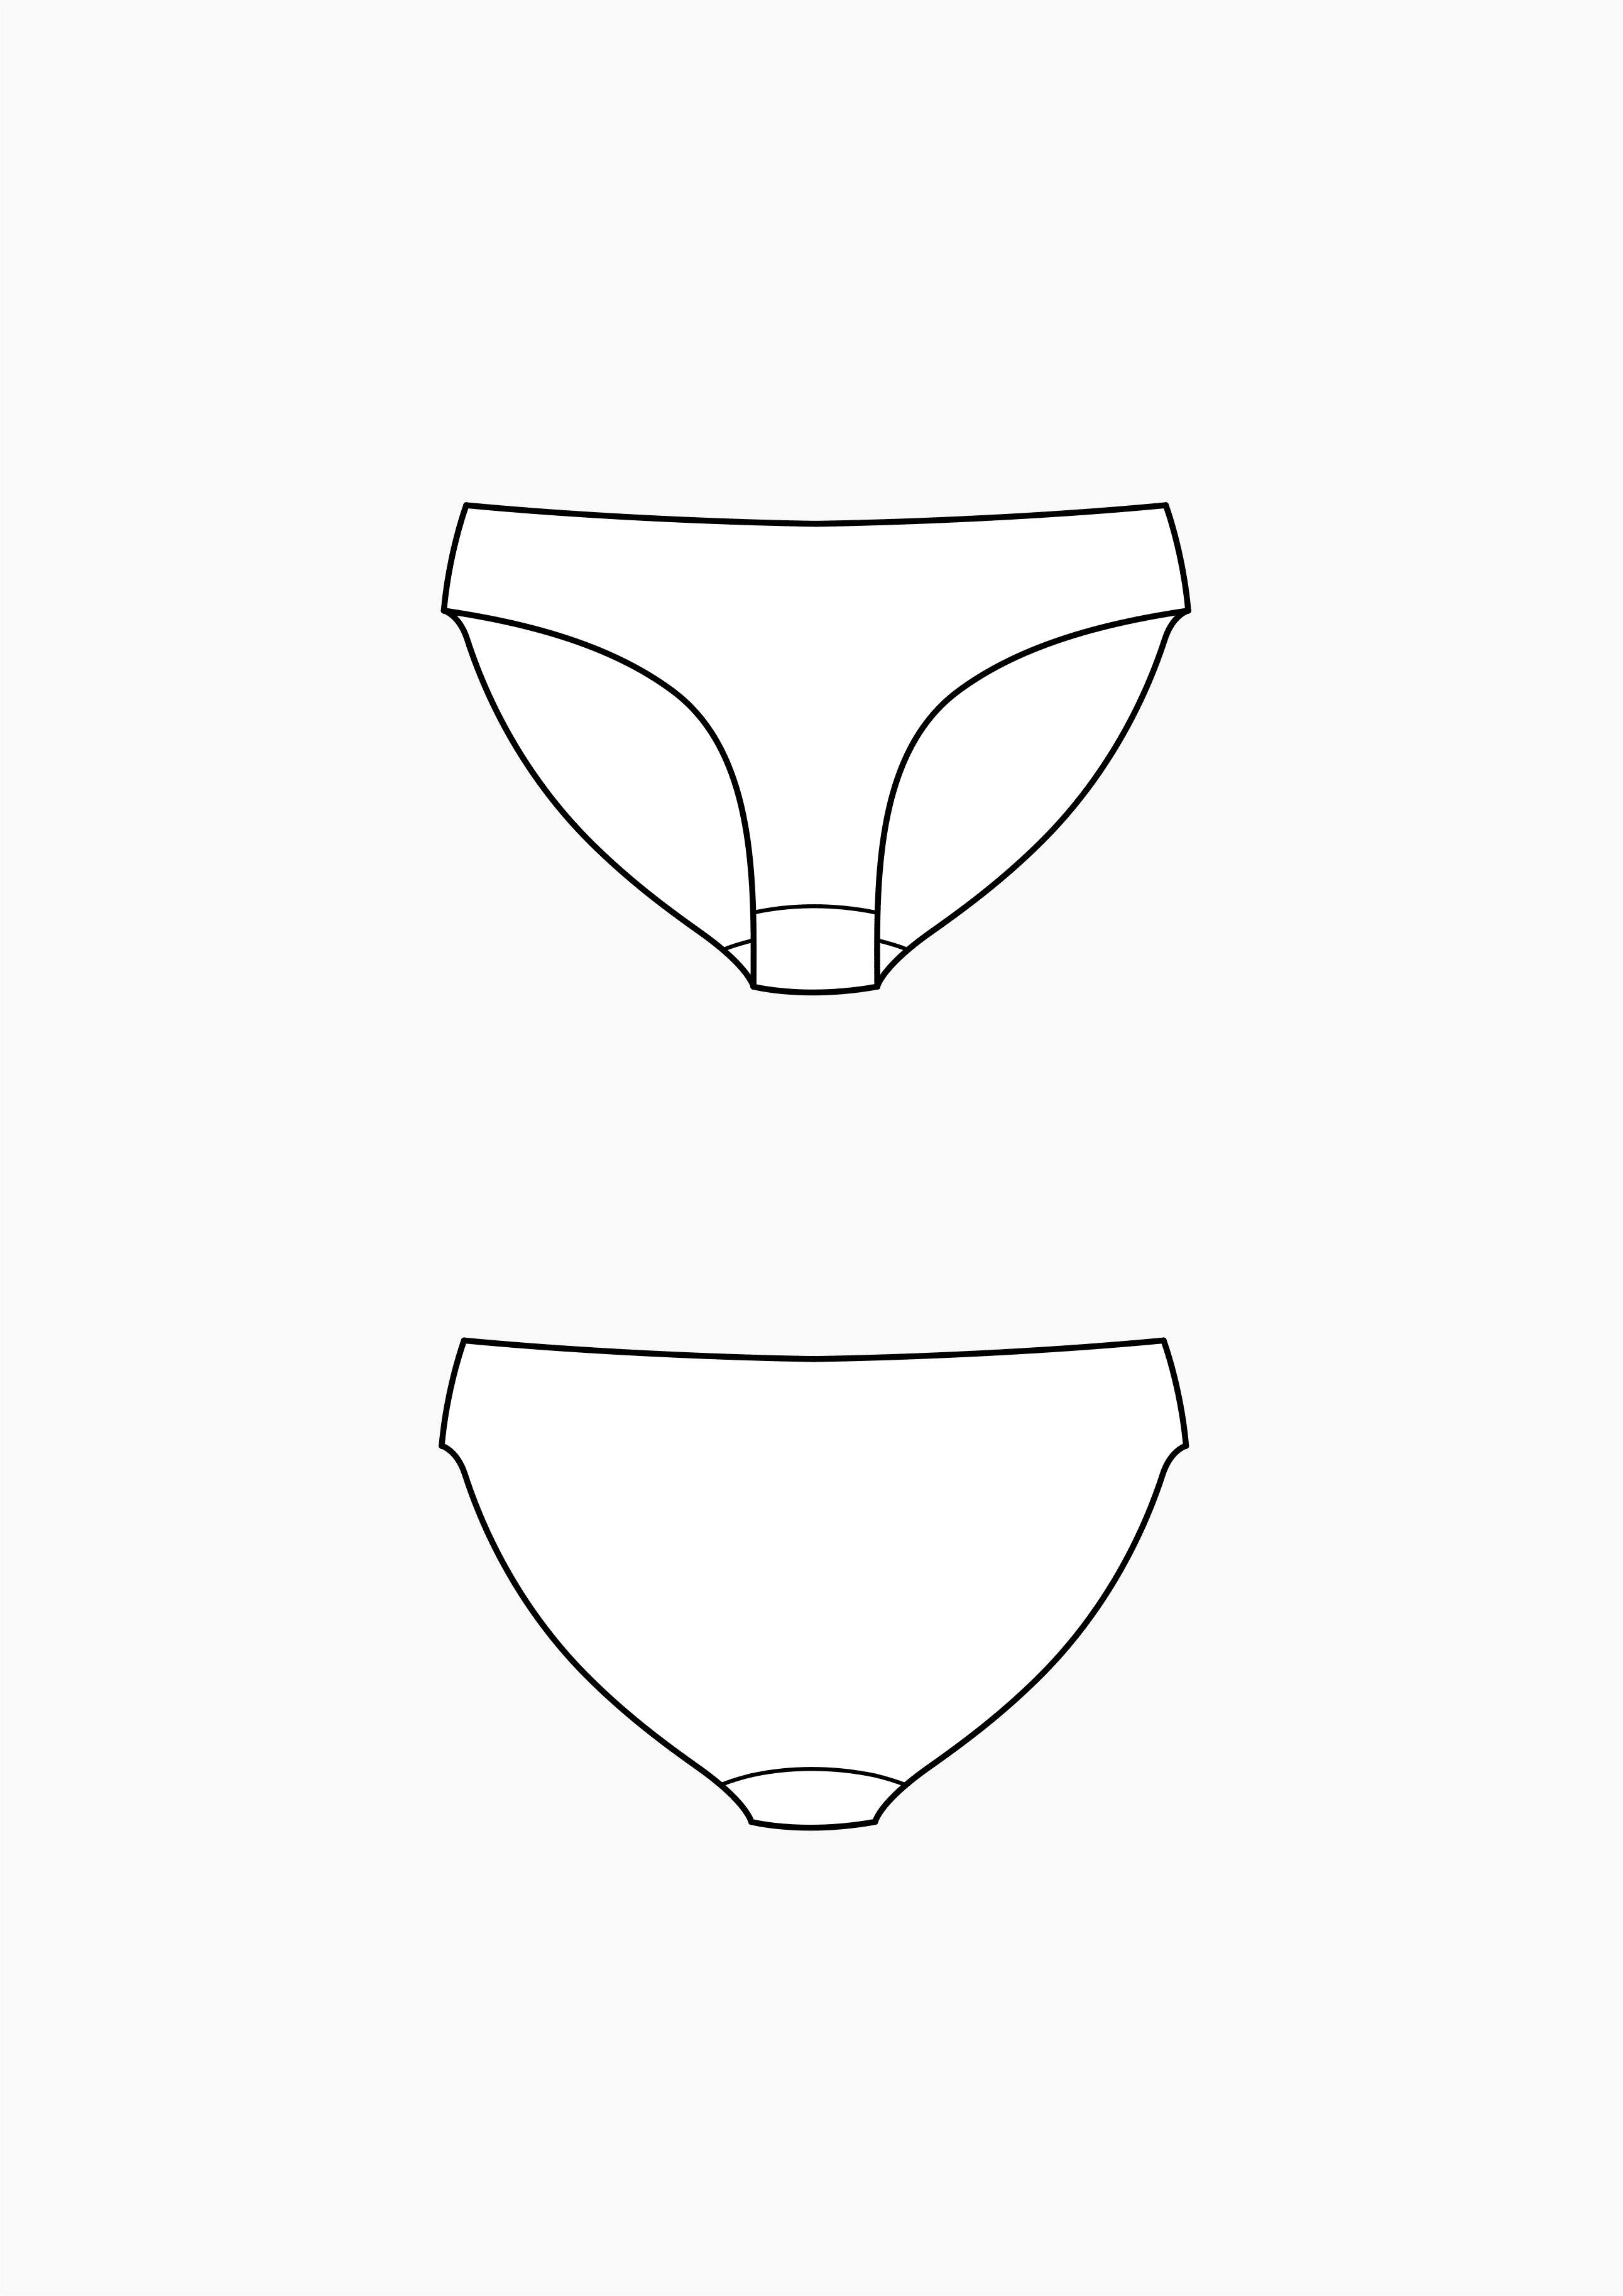 Product: Pattern Making Basic Blocks for Briefs